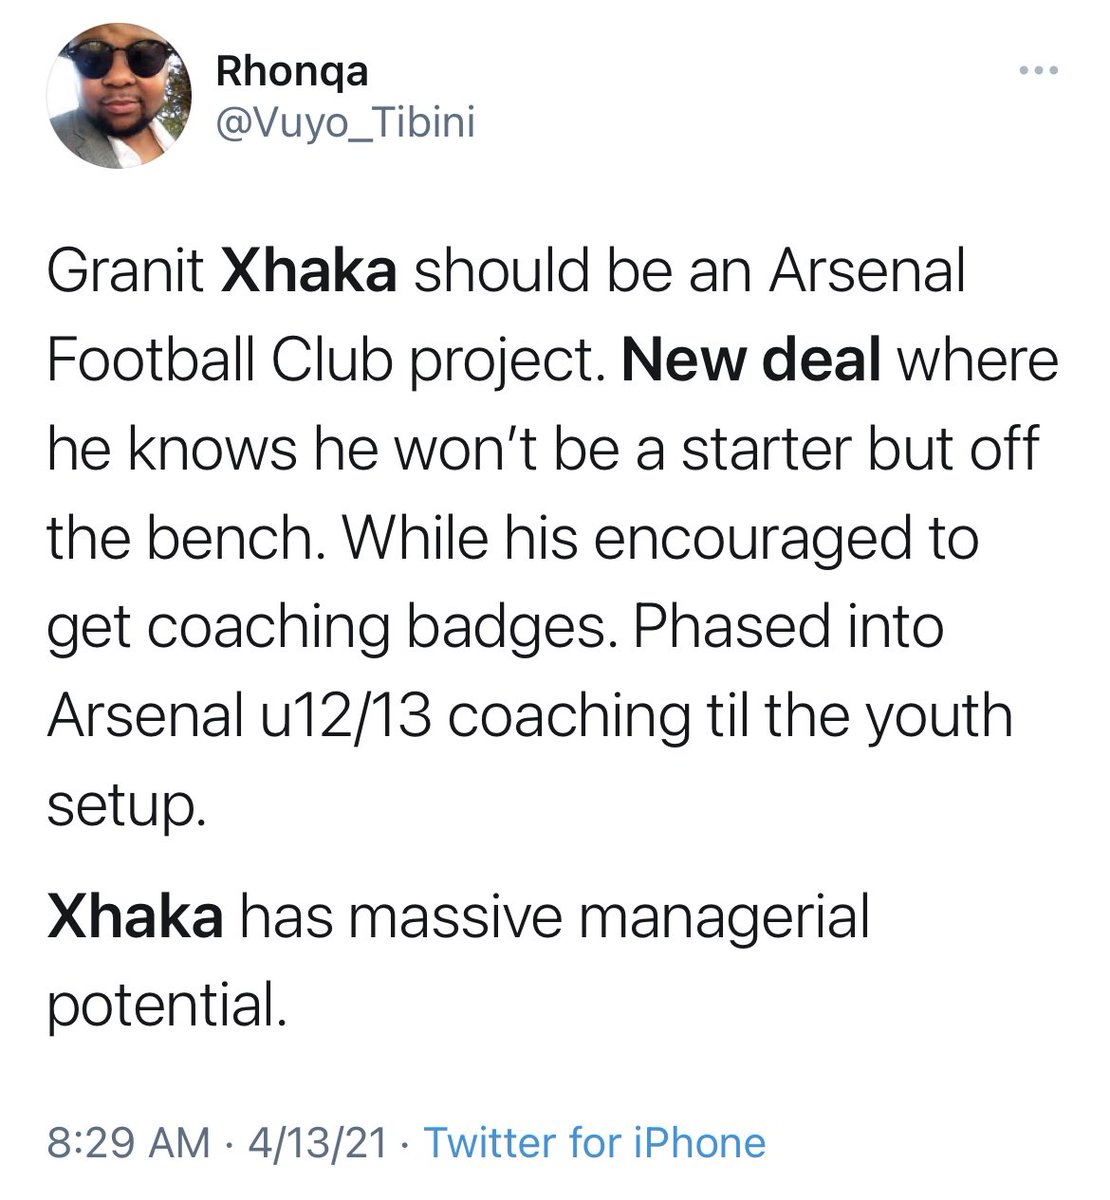 Bellerin, Xhaka, Holding are the three of the biggest liabilities from the backend of Wenger’s tenure that Mikel kept.“Mikel is getting rid of deadwood” but apparently Xhaka and Bellerin should be made captains and should have 4 more years at the club.“Long-term rebuild”